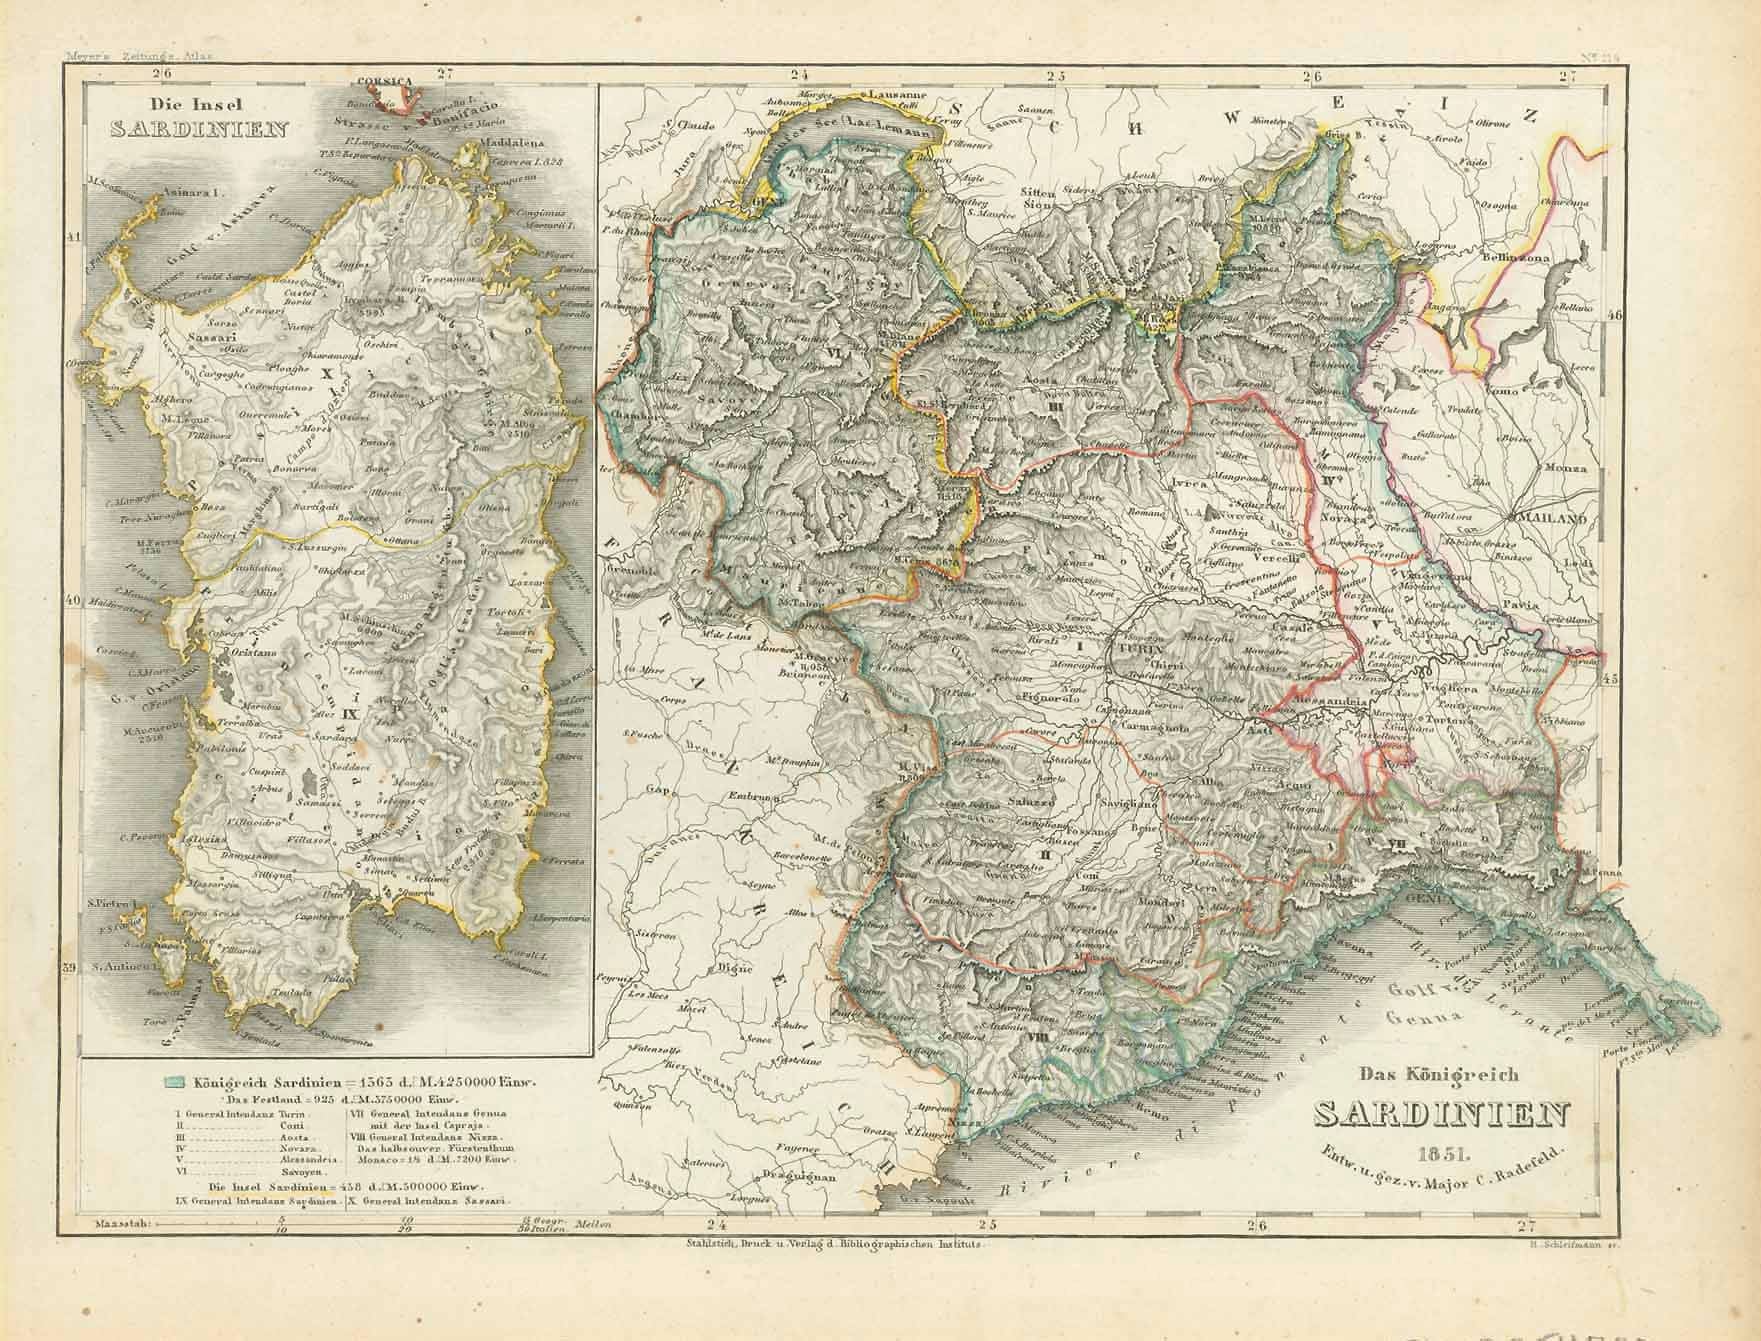 Sardinia. - "Das Königreich Sardinien 1851"  (The Kingdom of Sardinia)  The island of Sardinia in a side map. Main map: The extension of the "Kingdom of Sardinia" on the main land in Italy.  After having been, for centuries, a Vice-Kingdom of Spain, the island of Sardinia came into the possession of the Duke of Savoy in 1720, who assumed the higher ranking title of "King". Center of this kingdom was Turin in Peimont. Out of this resulted in 1861, the Kingdom of Italy., 1851, Original antique print 